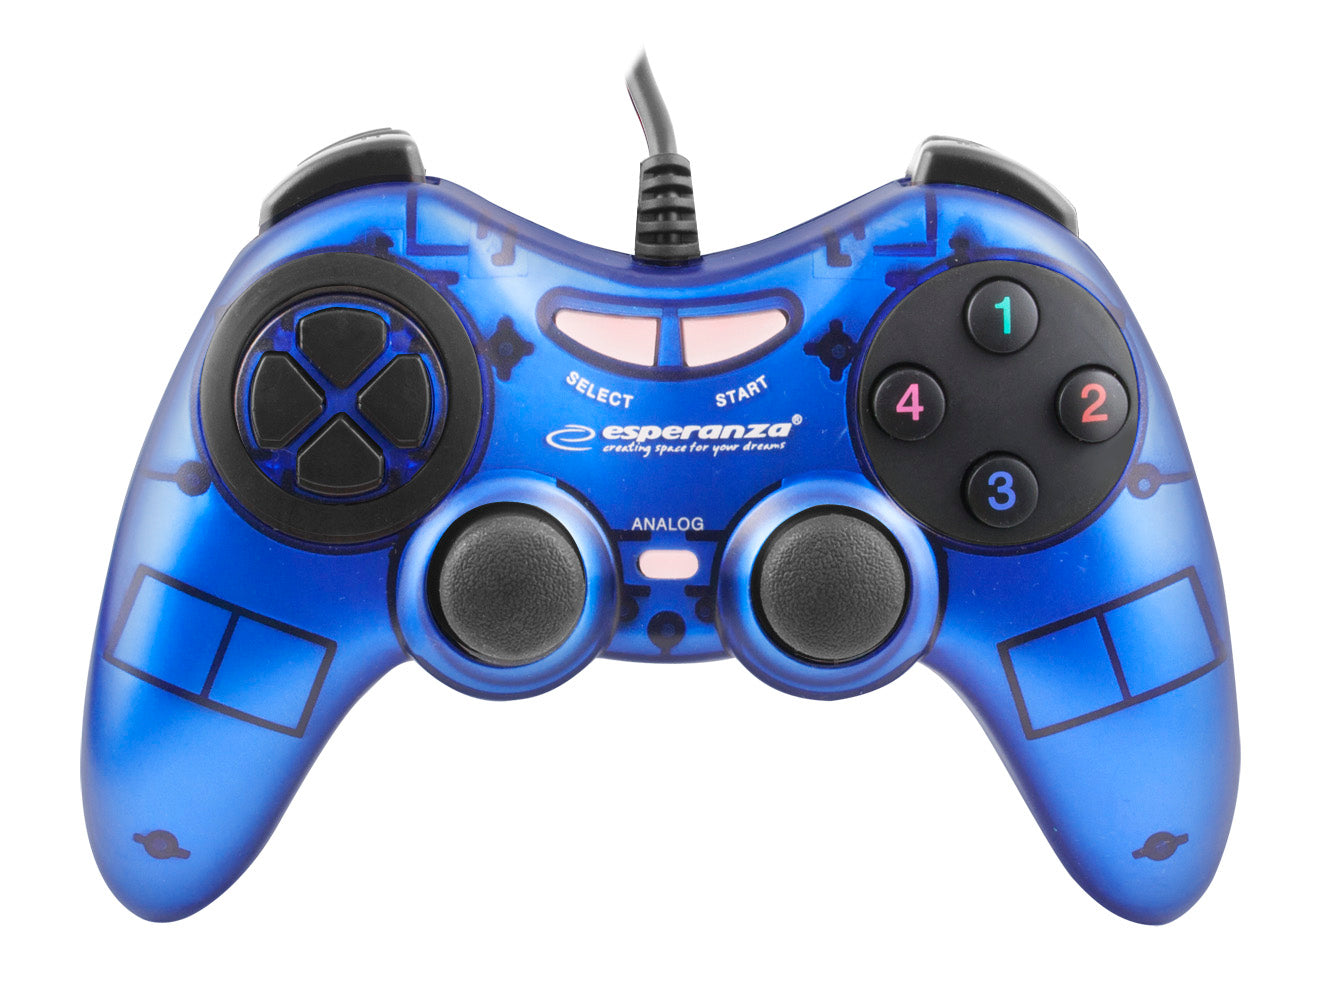 Wired Joypad Gamepad Controller Joystick Controller with Vibration for PC